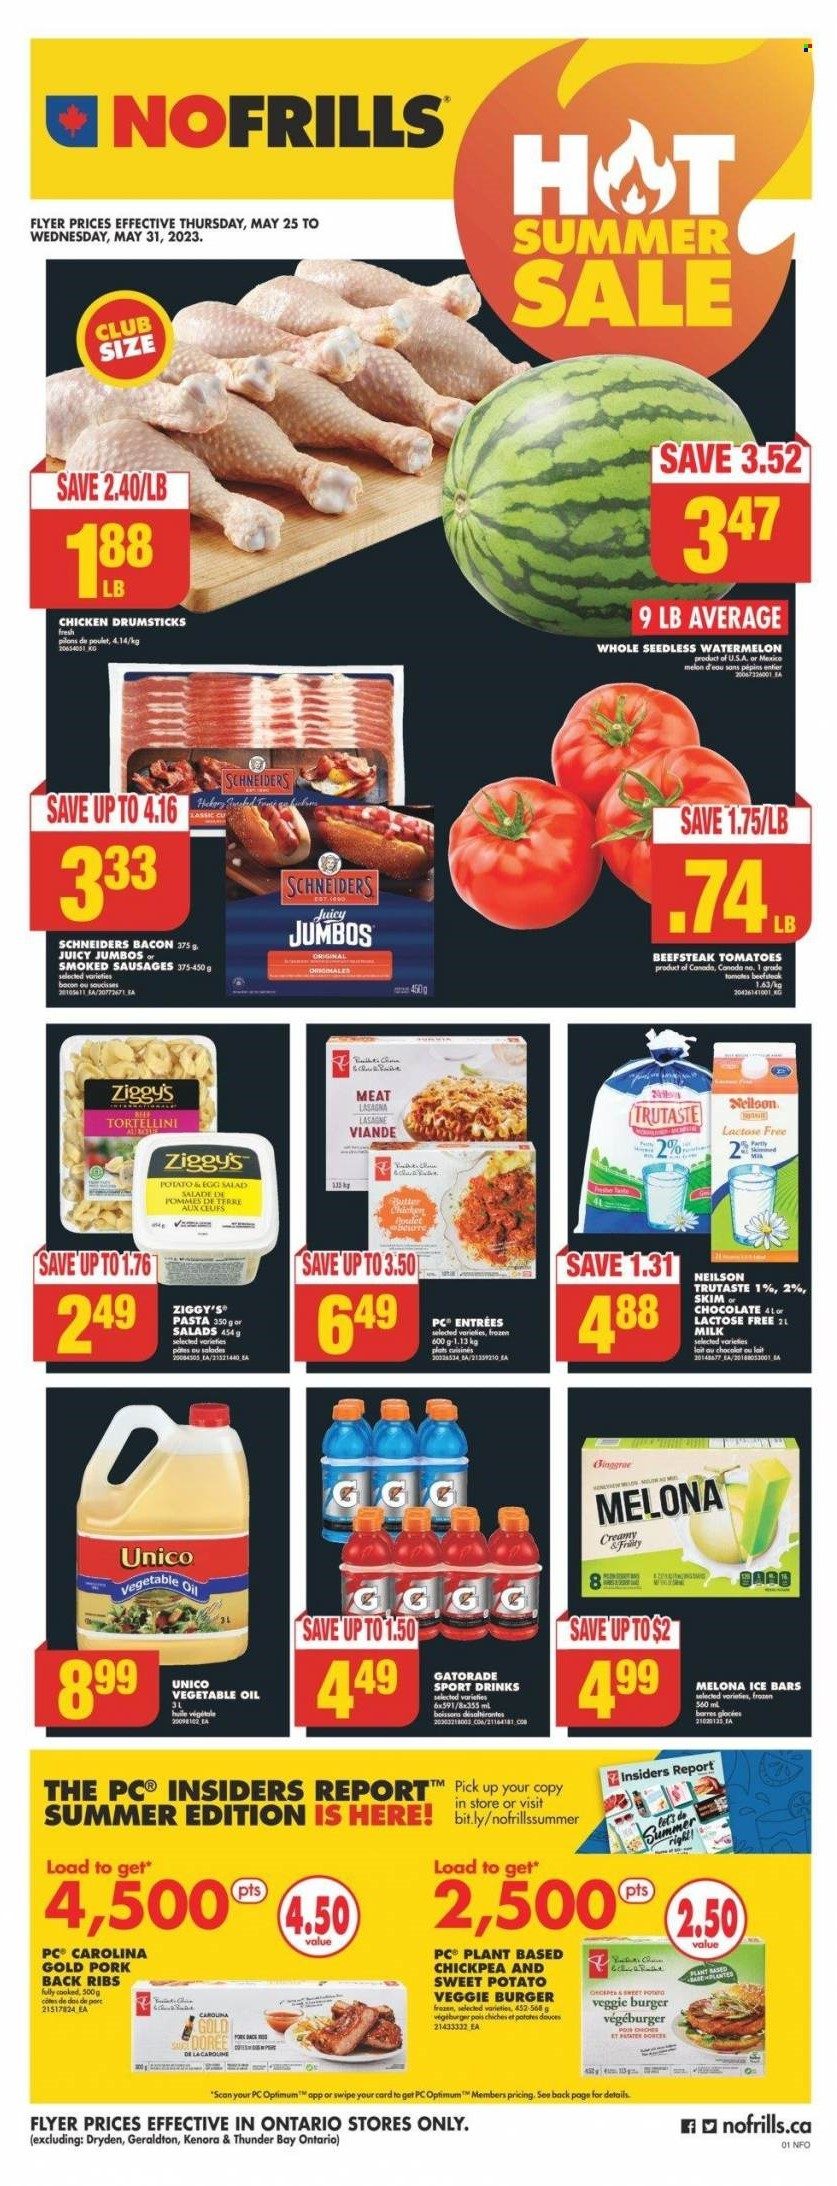 No Frills Flyer - May 25, 2023 - May 31, 2023 - Sales products - tomatoes, salad, watermelon, melons, pasta, tortellini, veggie burger, lasagna meal, bacon, sausage, milk, chocolate, vegetable oil, oil, Gatorade, chicken drumsticks, chicken, ribs, pork meat, pork ribs, pork back ribs, Optimum, electrolyte drink. Page 1.